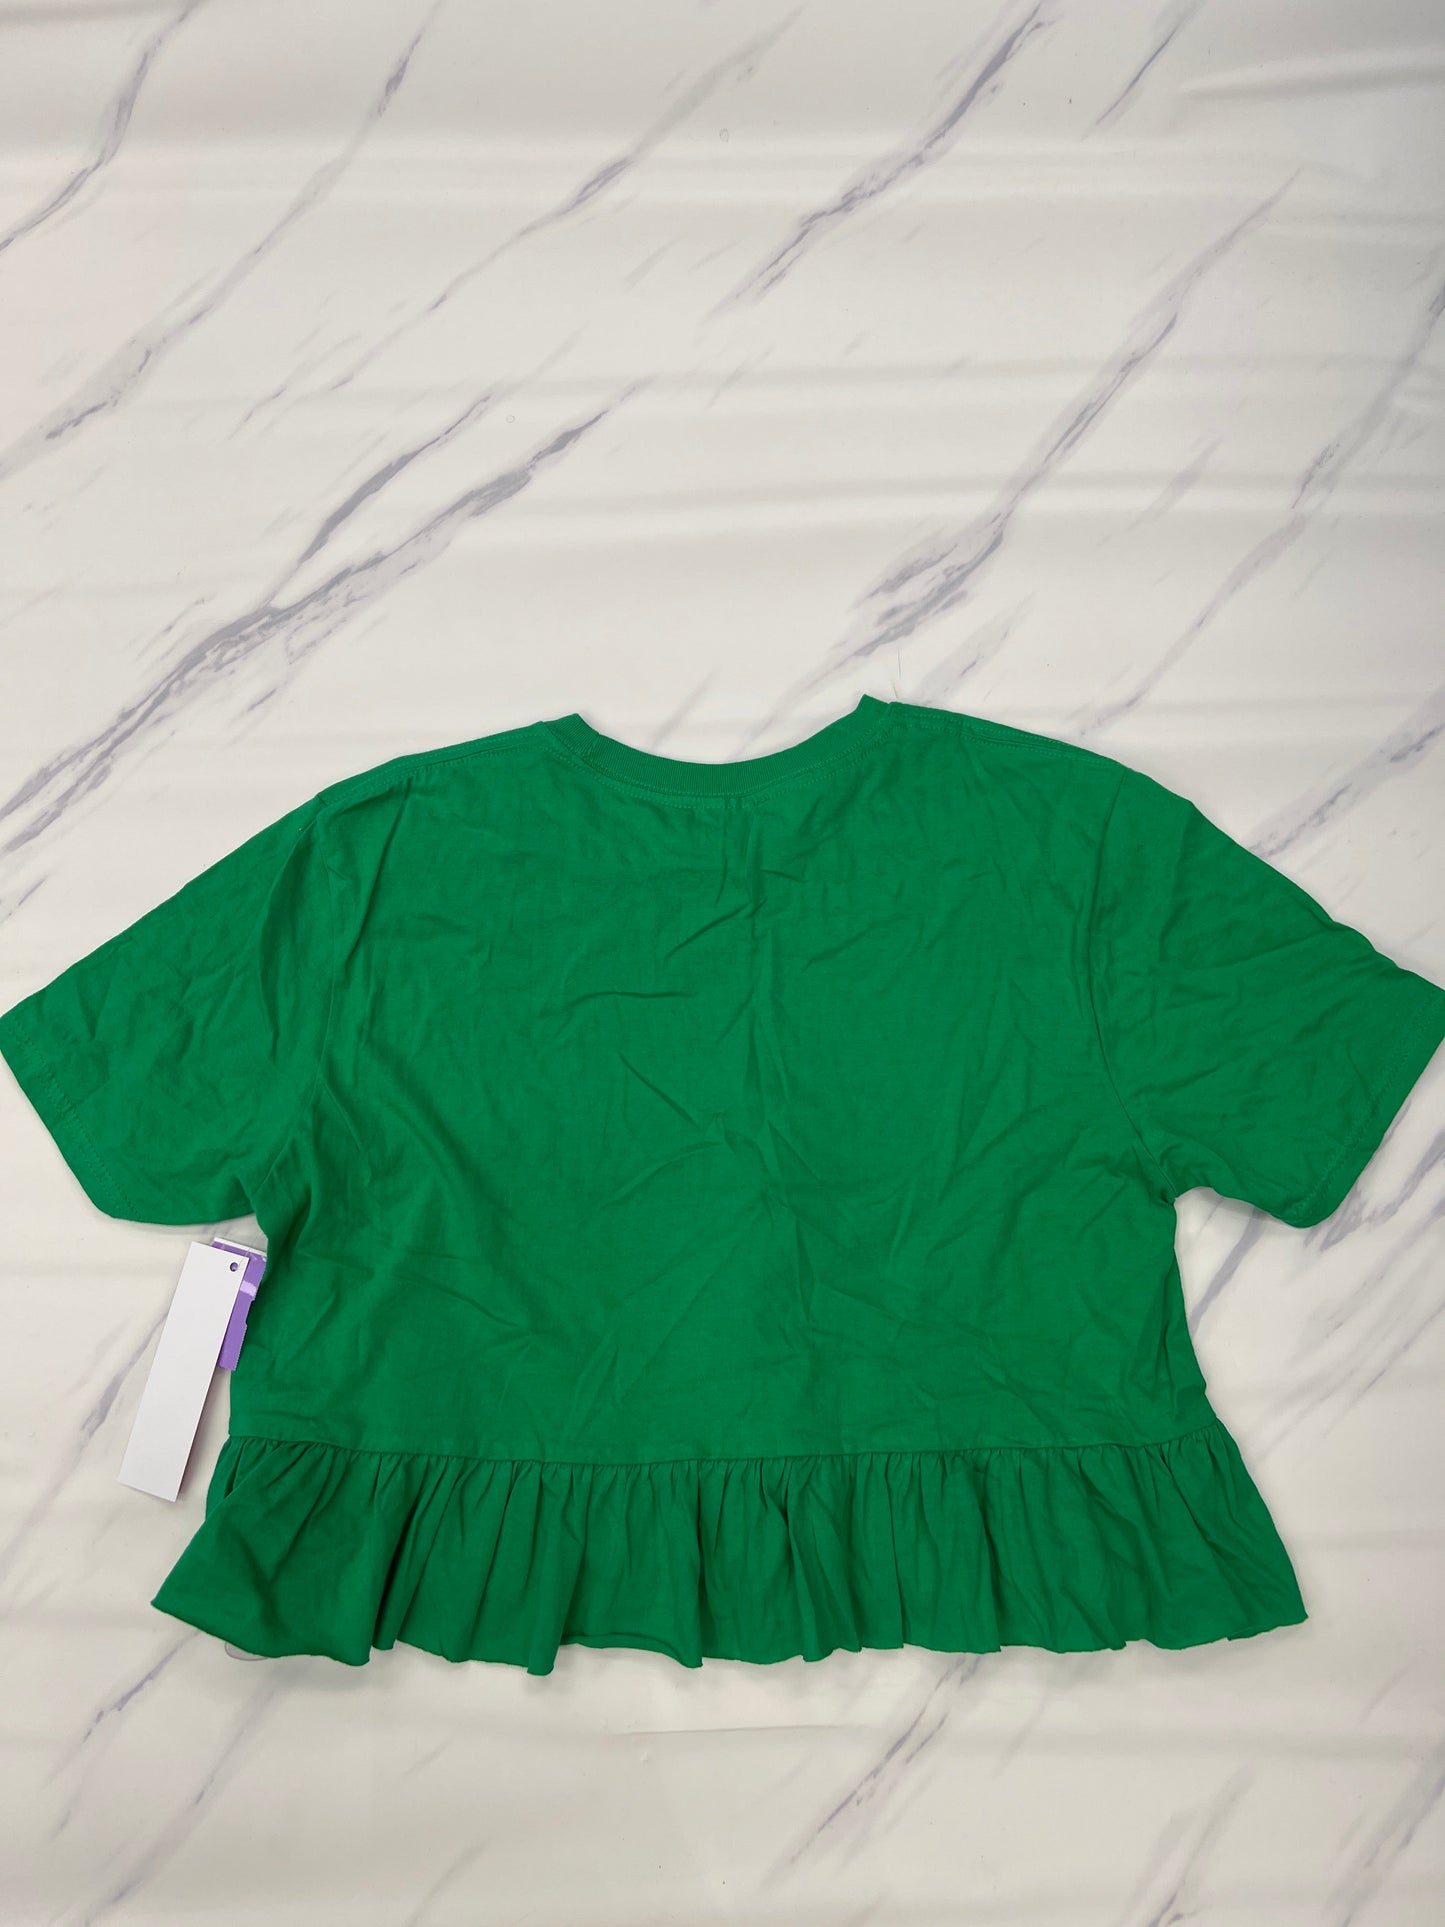 Green Top Short Sleeve Urban Outfitters, Size S